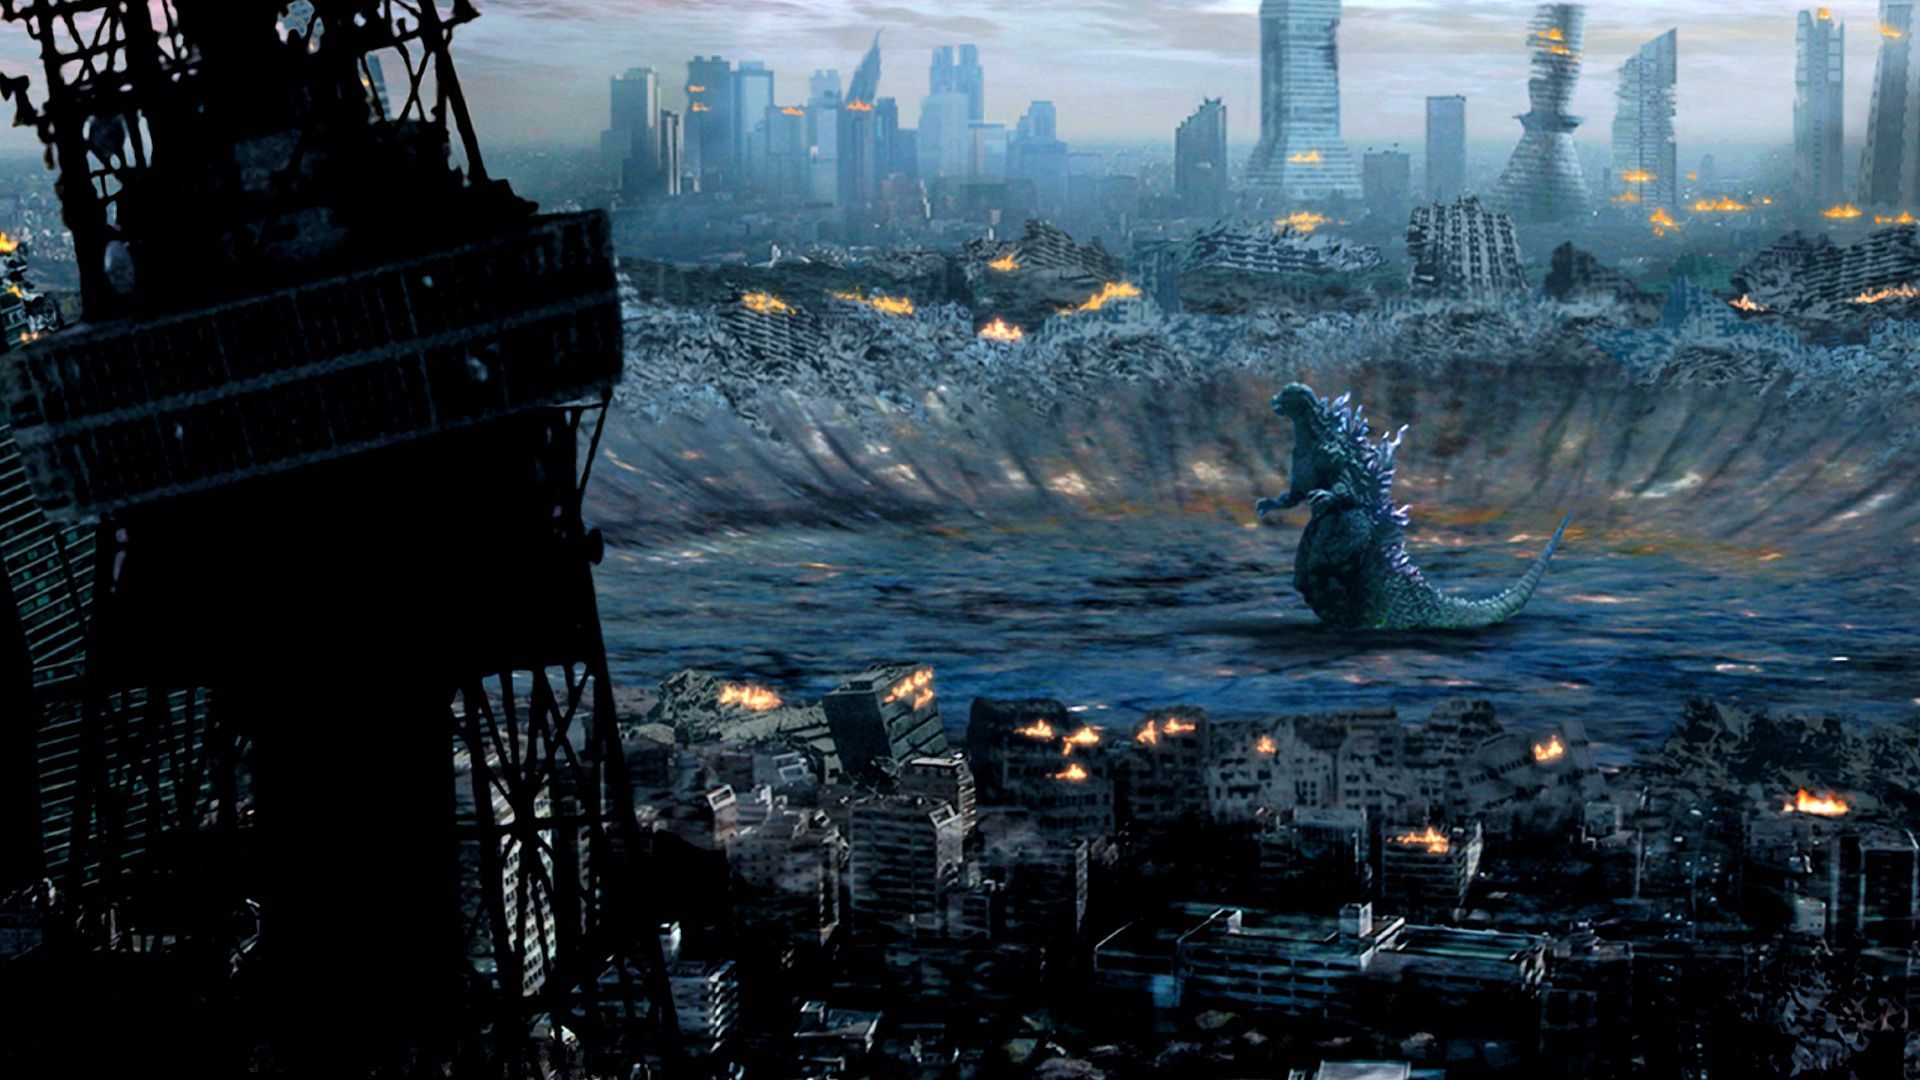 Godzilla 2014 Free Wallpaper Background For Co 3478 Wallpaper Cool